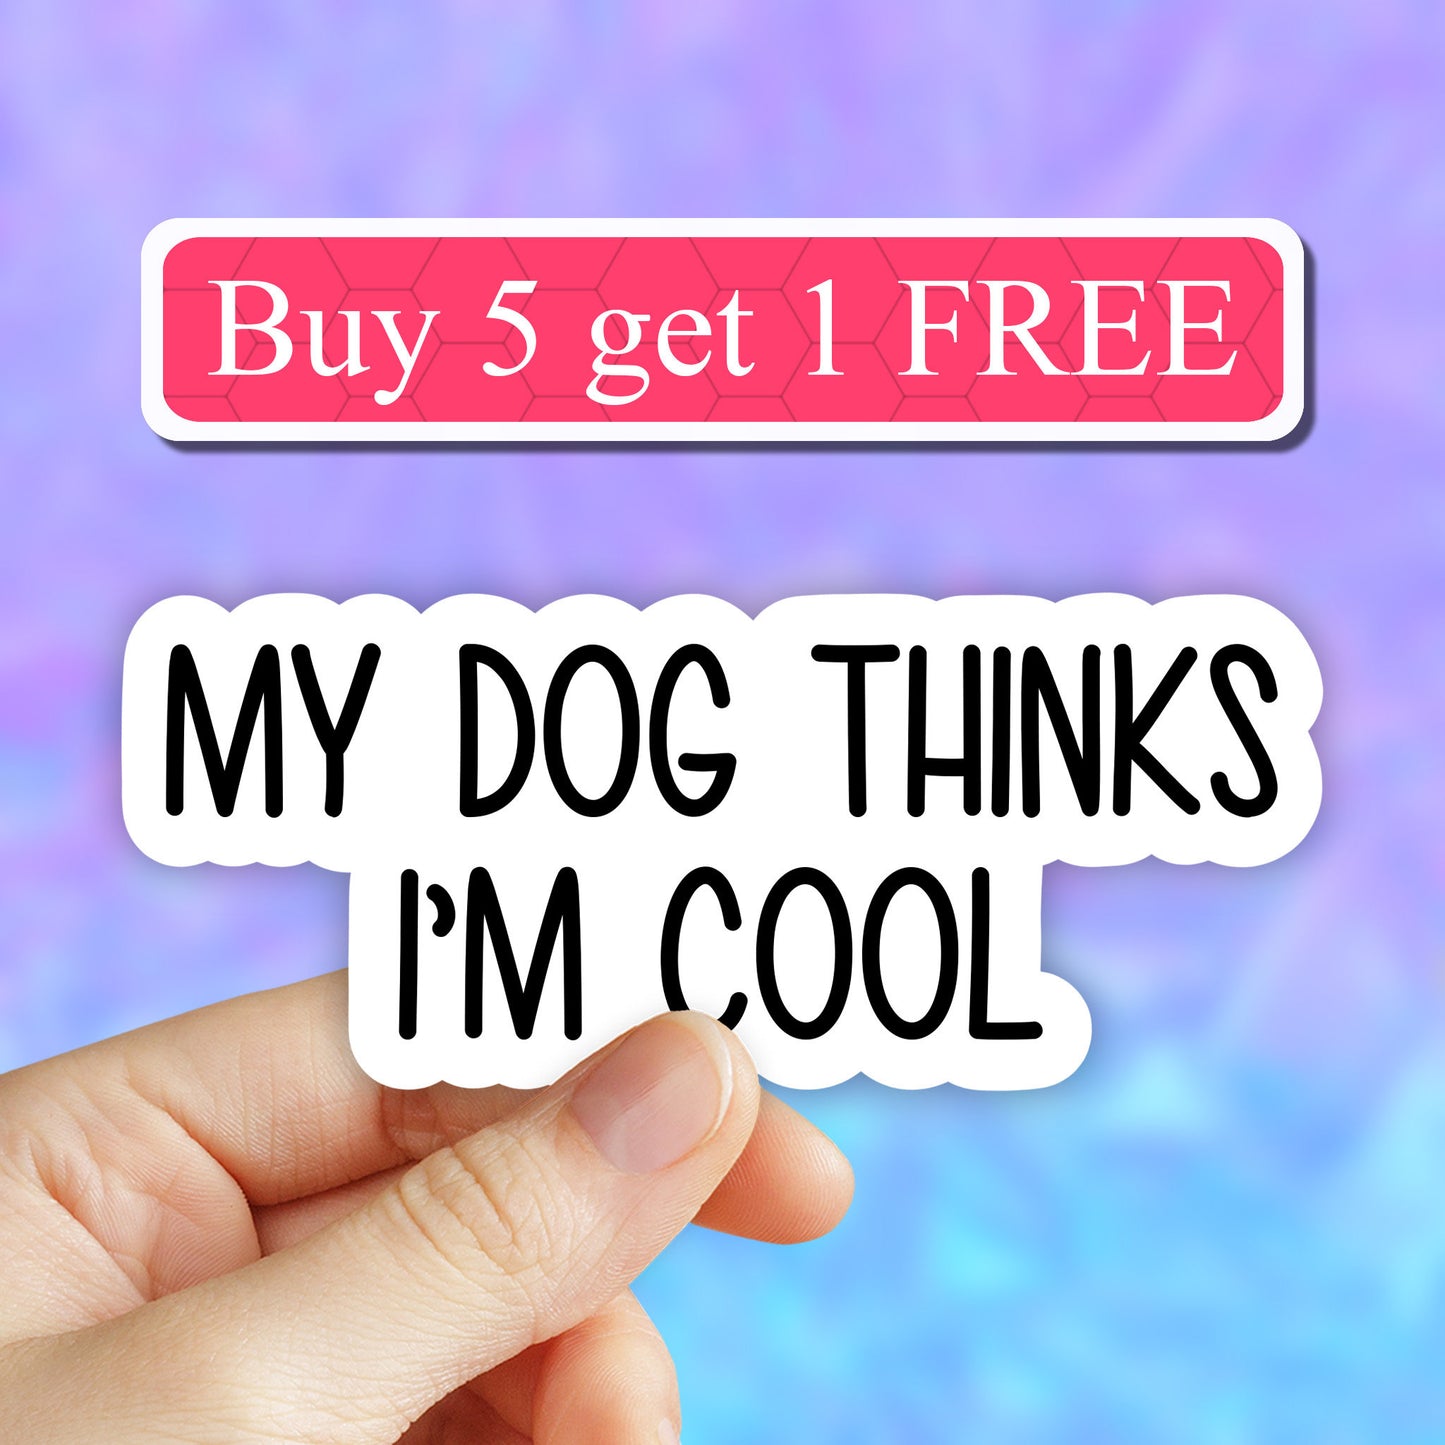 My dog thinks im cool sticker, dogs funny sticker, dog laptop decals, tumbler stickers, dog water bottle sticker, dog water bottle decal